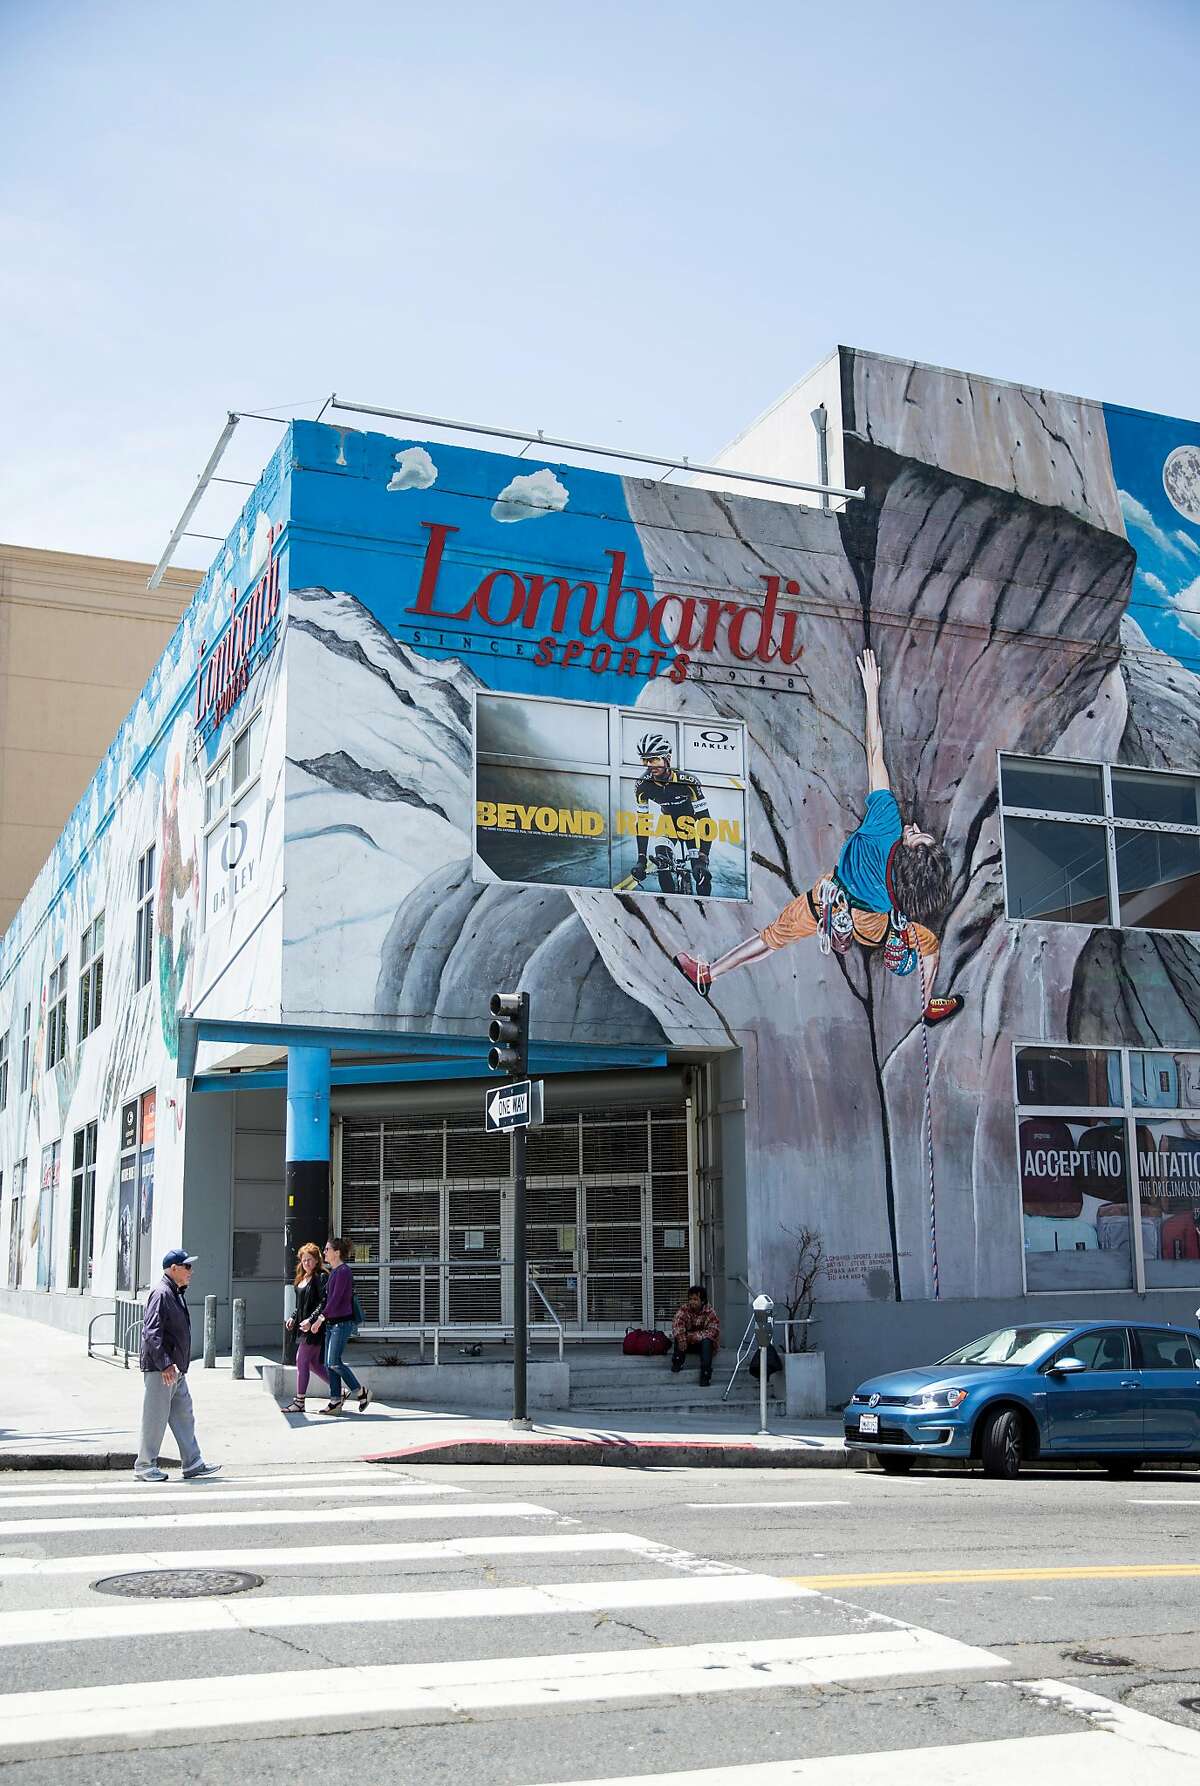 The building that formally housed Lombardi's Sports store, located at Polk and Jackson, is seen in San Francisco, Calif., on Saturday, May 28, 2016. The SF Planning Commission will be holding a hearing on Thursday, June 2, 2016 to discus a proposal to turn the space into the city's first 365 by Whole Foods Market.